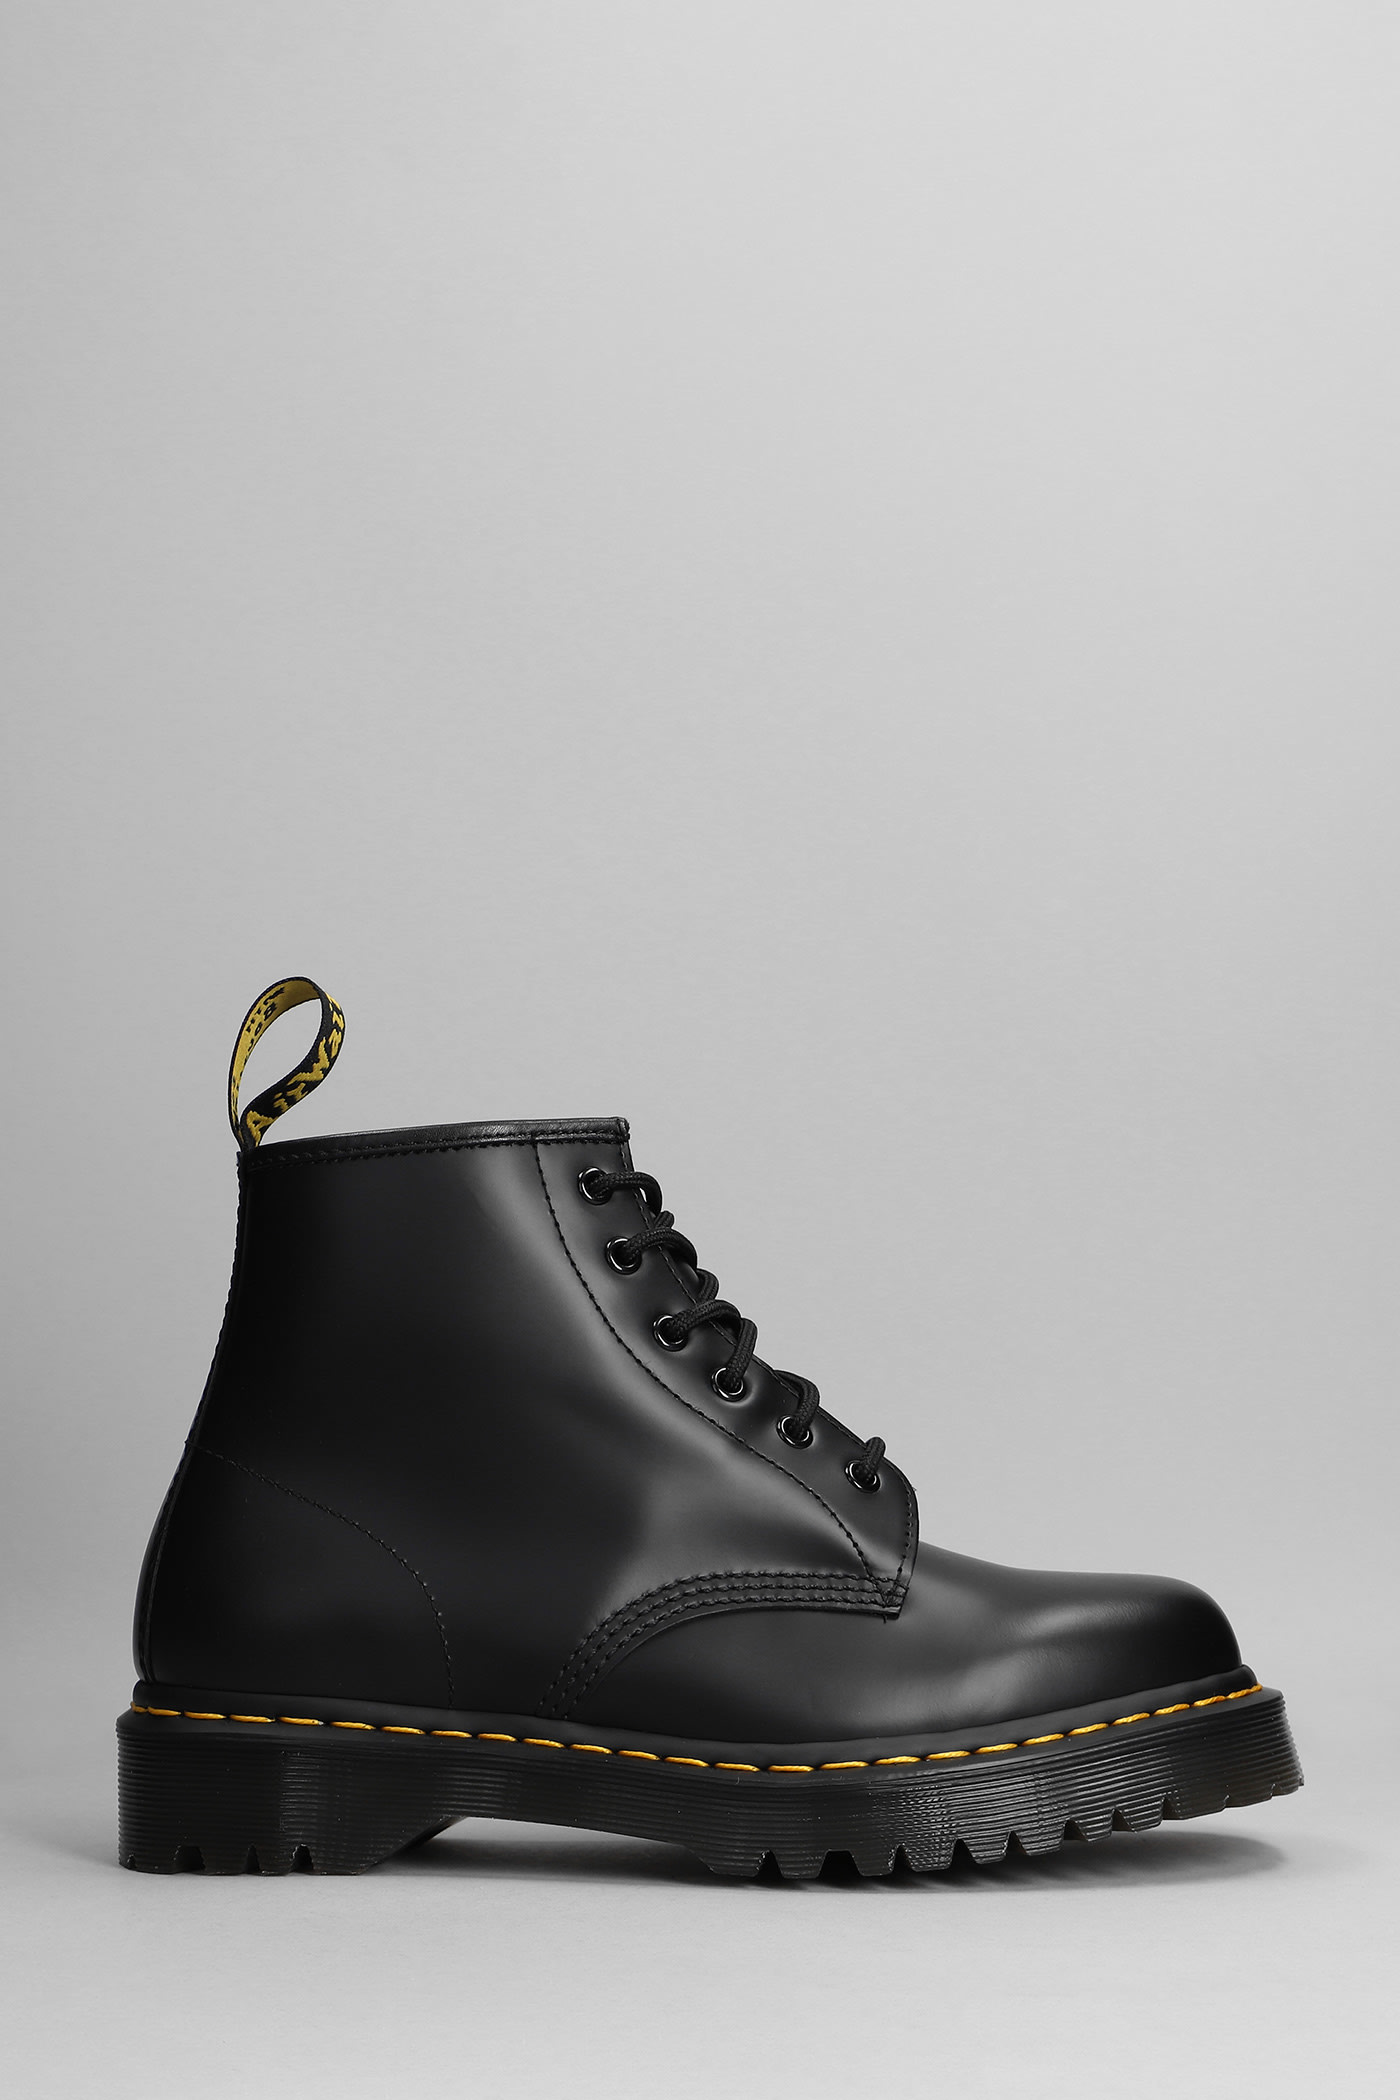 Dr. Martens 101 Bex Combat Boots In Black Leather